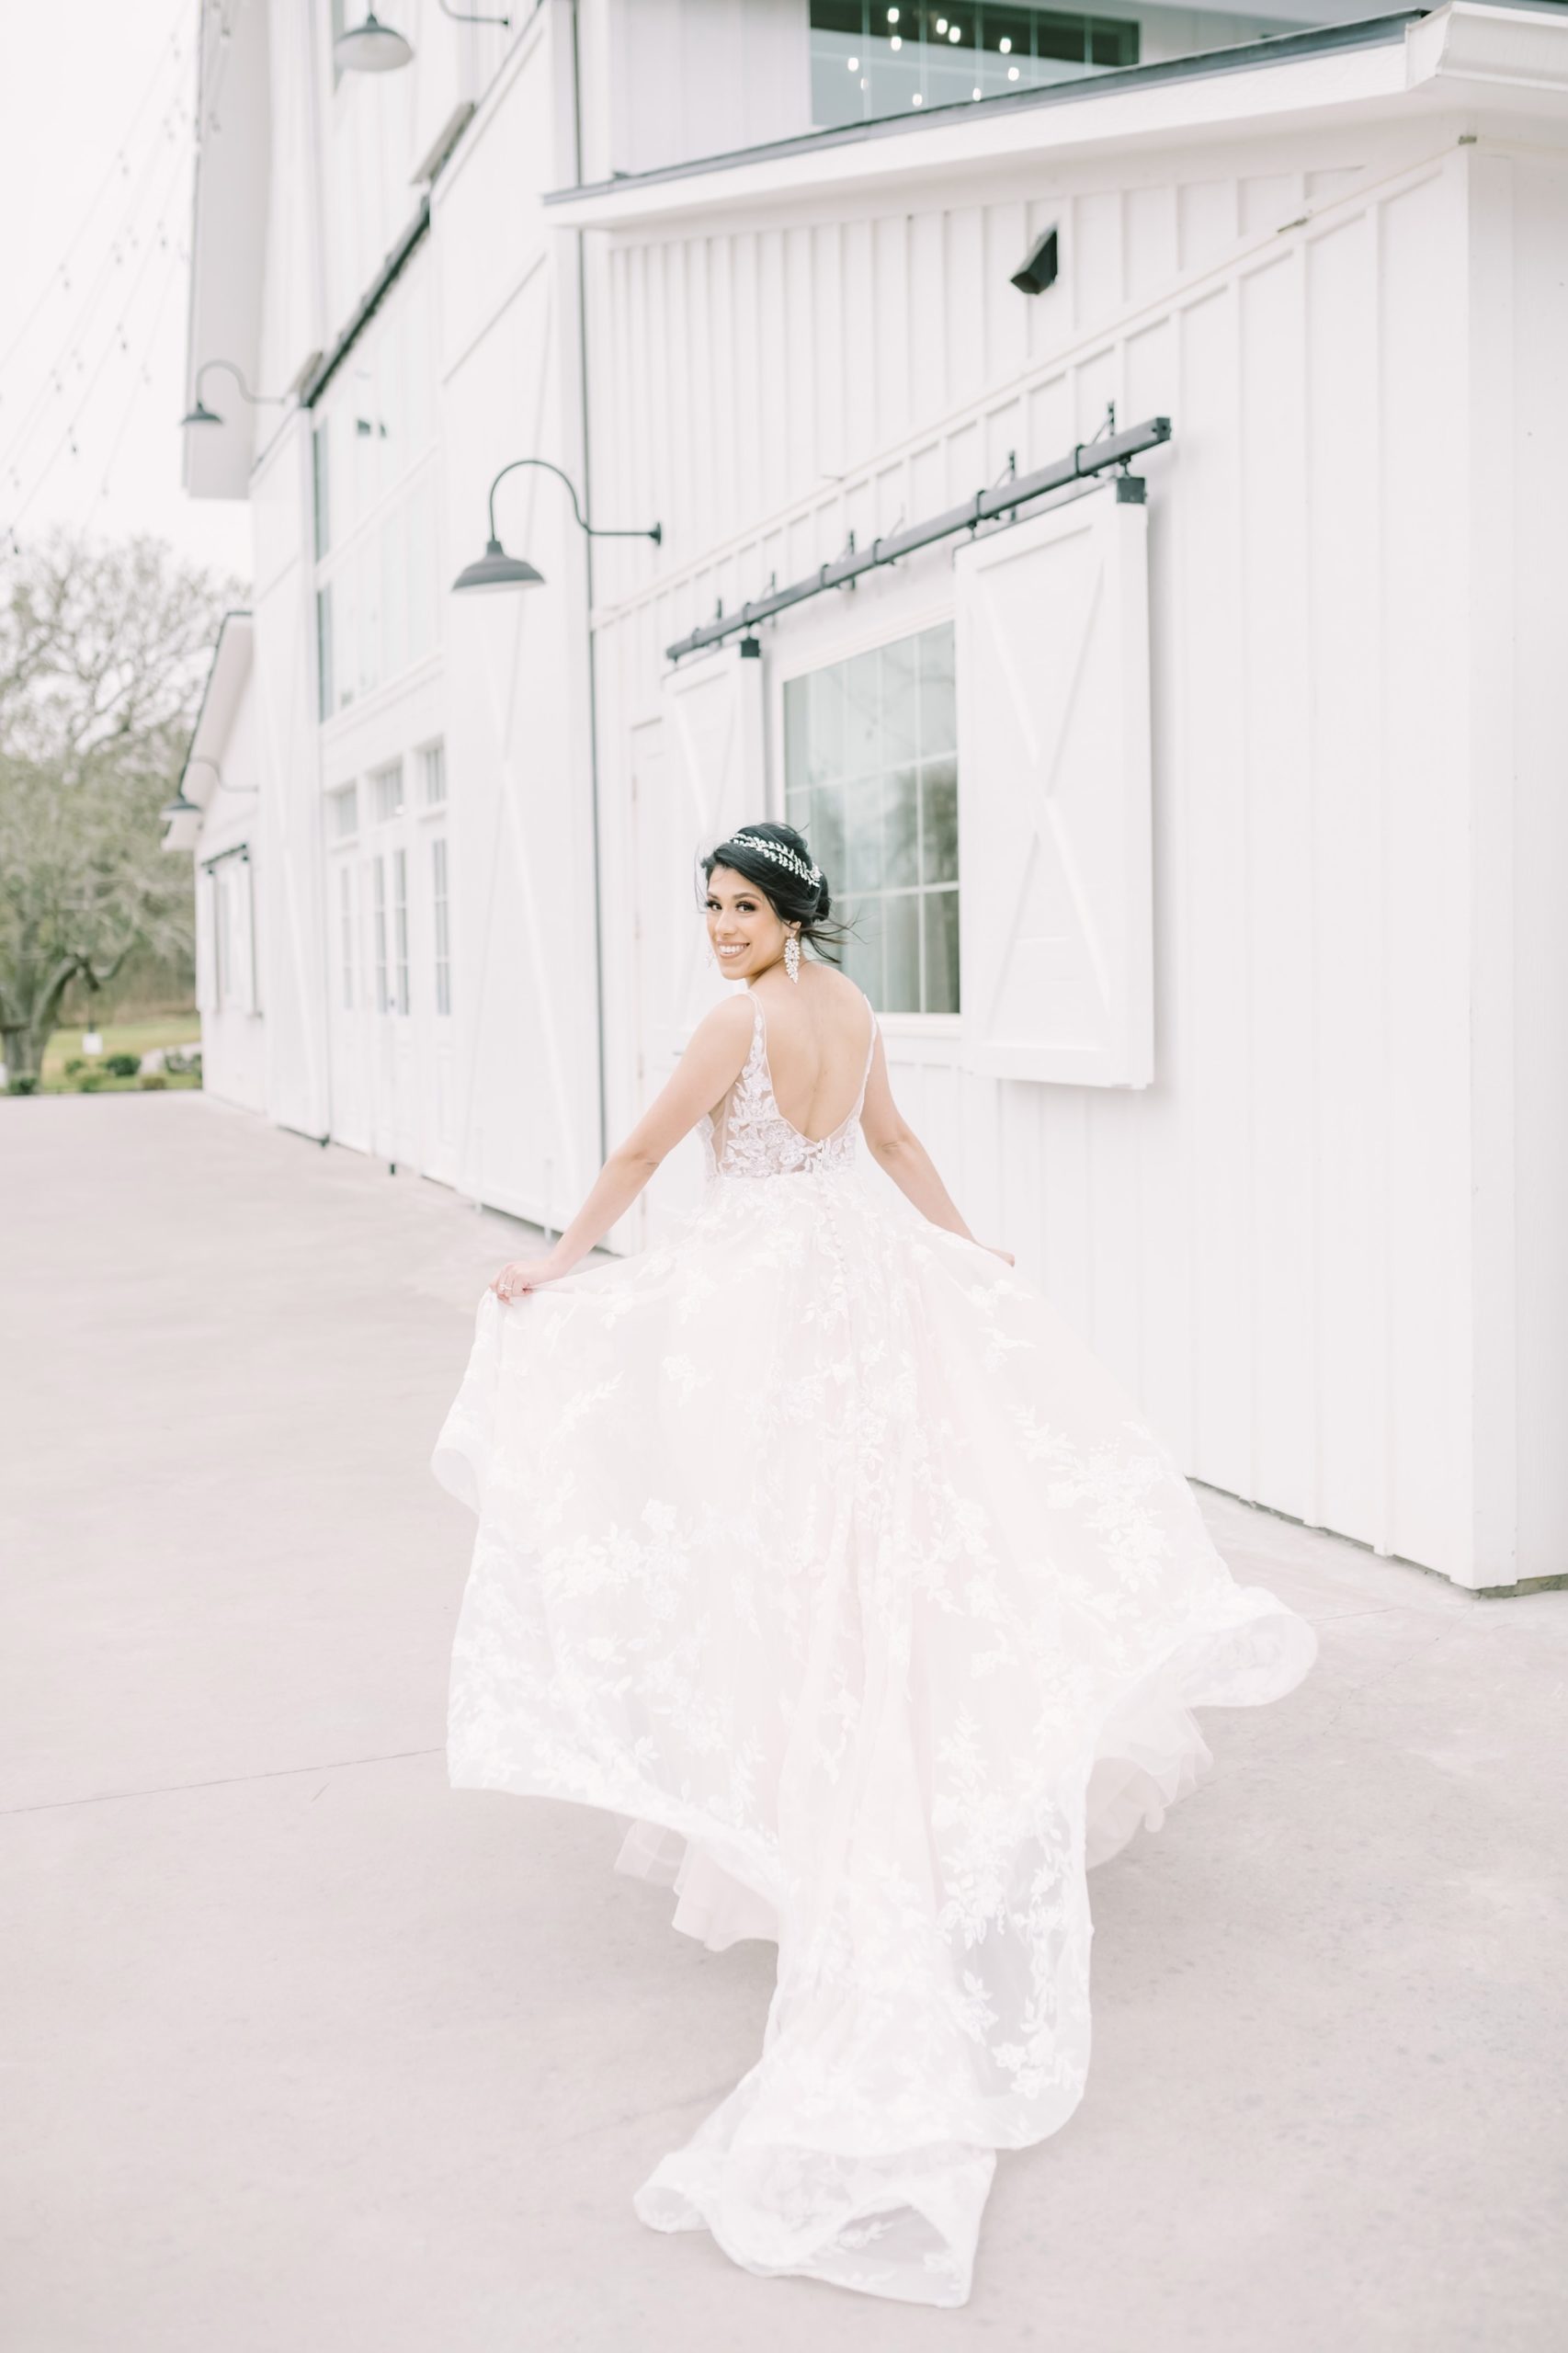 With her dress billowing in the wind a bride runs toward a barn captured by Christina Elliott Photography. yes to the dress #ChristinaElliottPhotography #ChristinaElliottBridals #Houstonweddings #Farmhousewedding #TheSpringsVenue #BridalsHouston